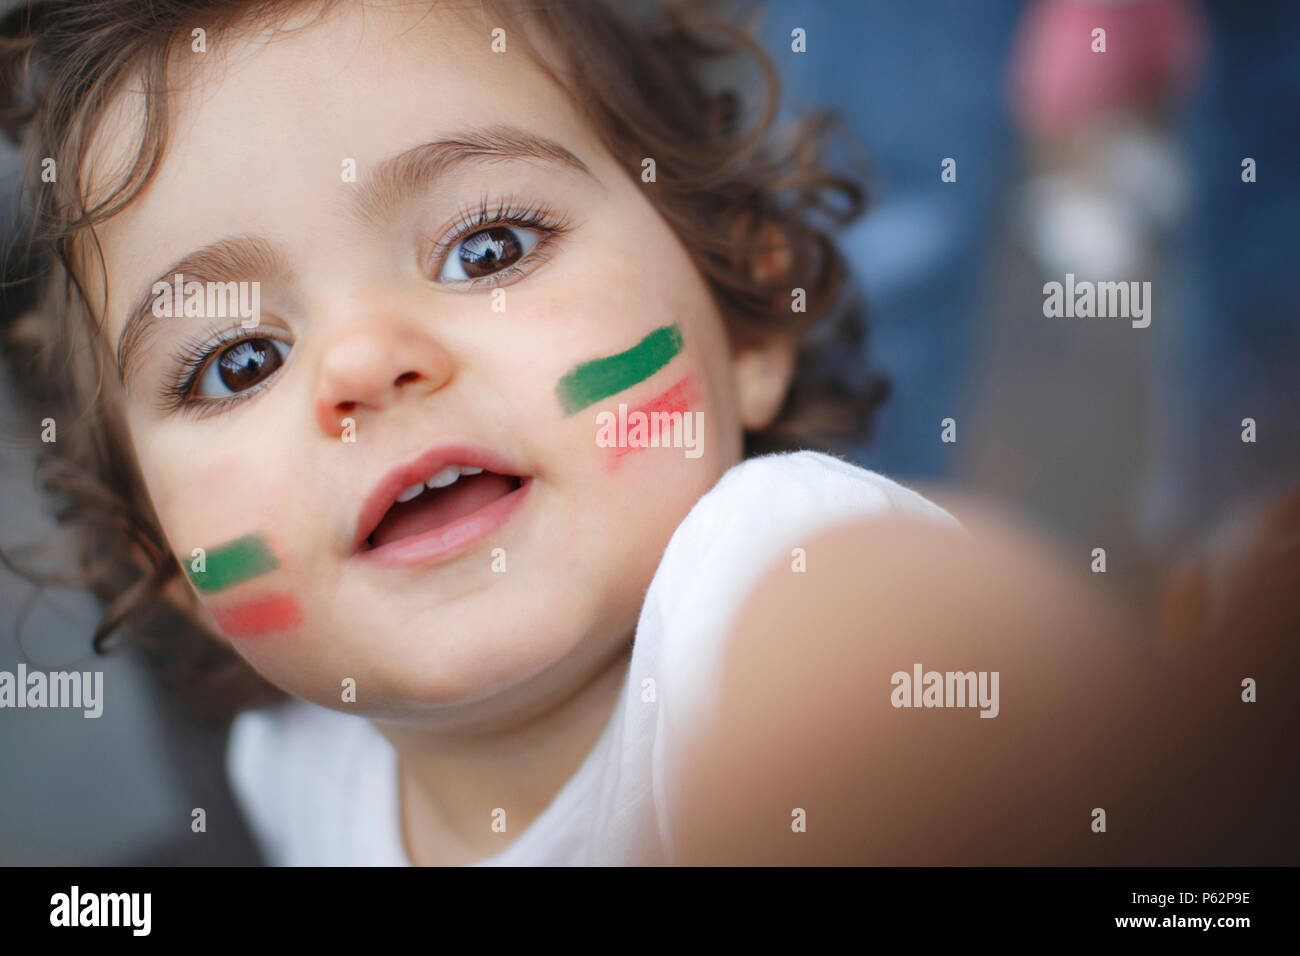 Kid fan with green and red flag painted on face Stock Photo